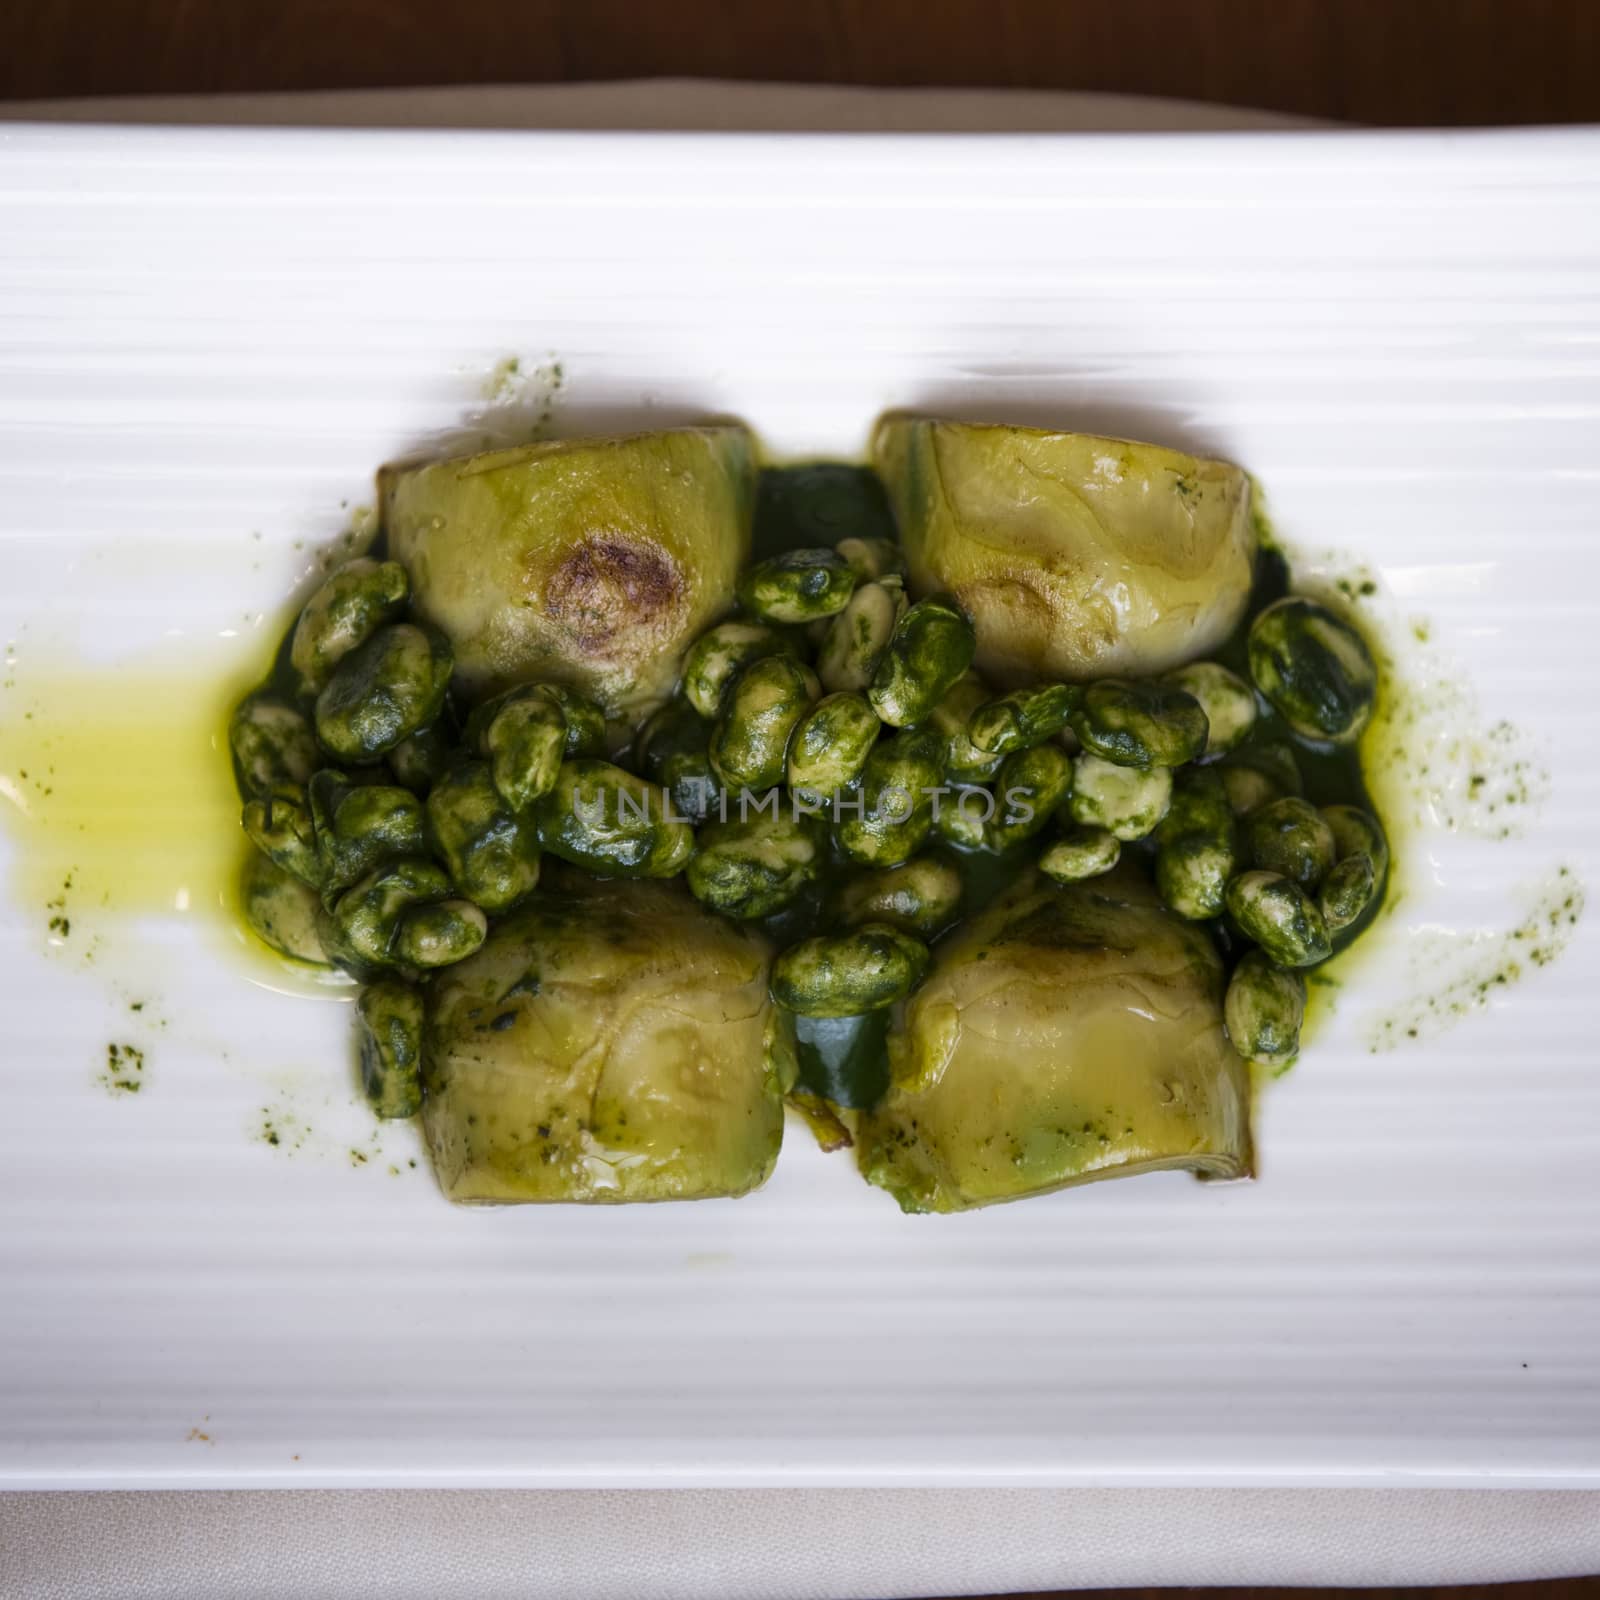 Delicious dish of broad beans (fava beans) and artichokes dressed with spinachs and olive oil. The view is an overhead shot, the main color is green and the plate is white over a background of wood.